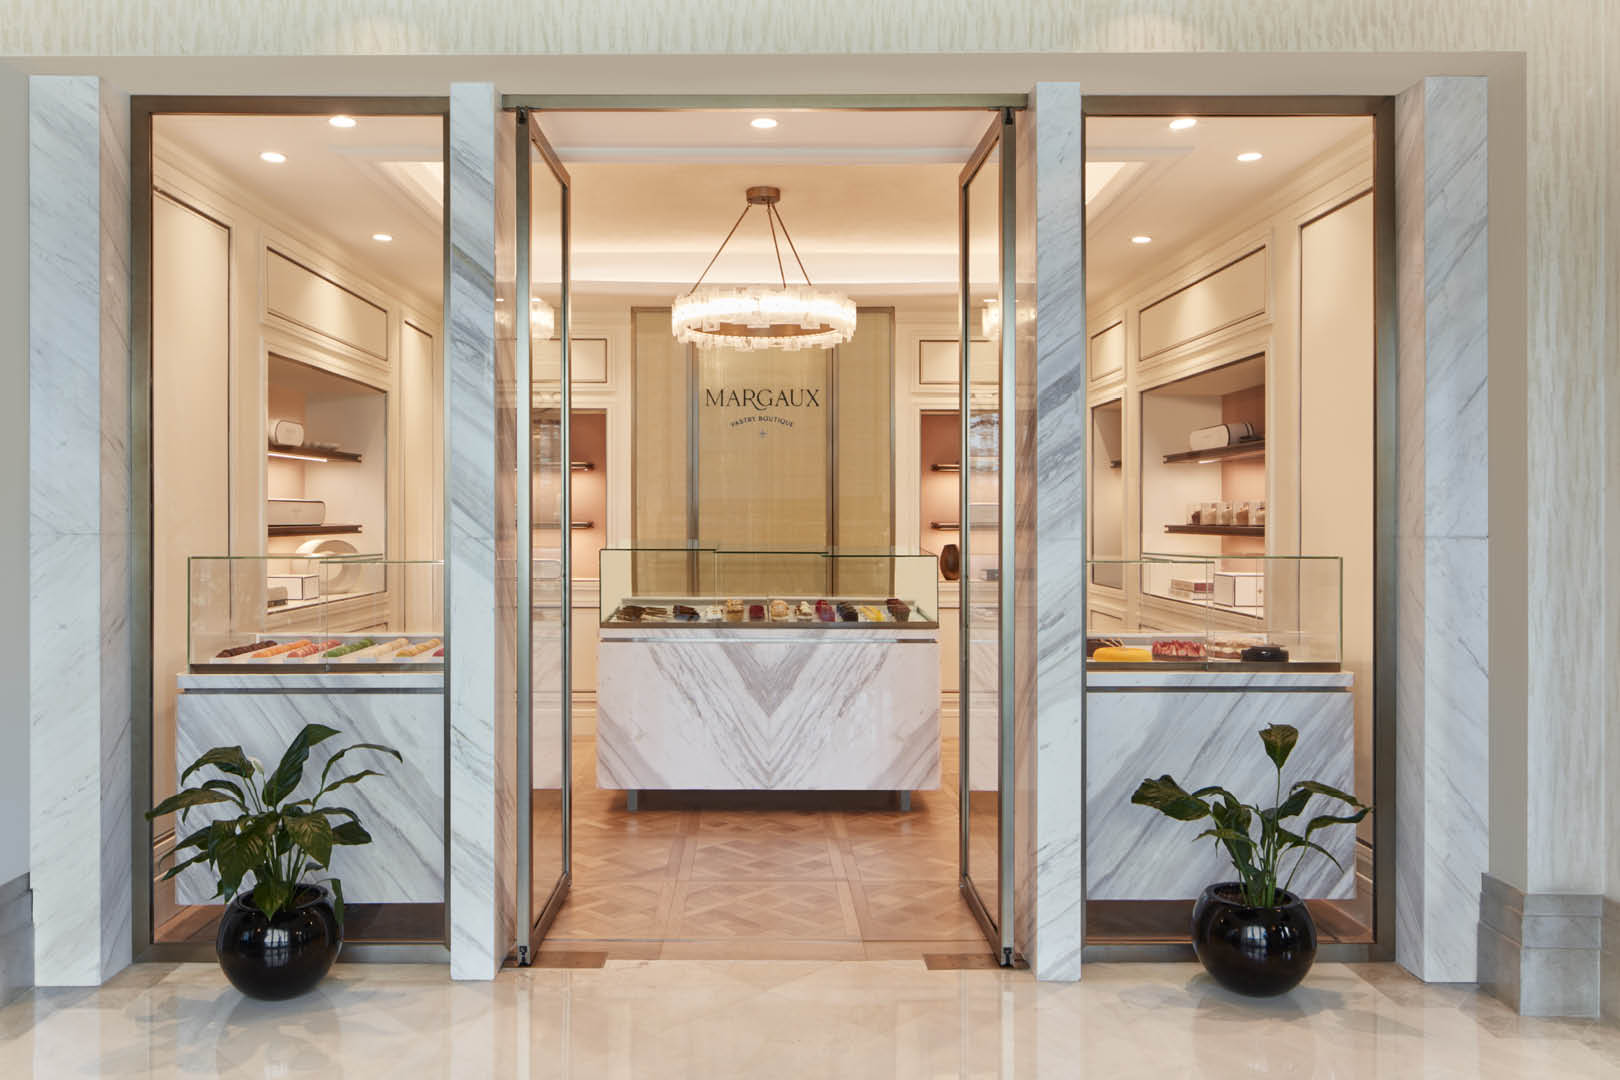 Margaux | French Patisserie Restaurant in Jumeirah Mina A'Salam